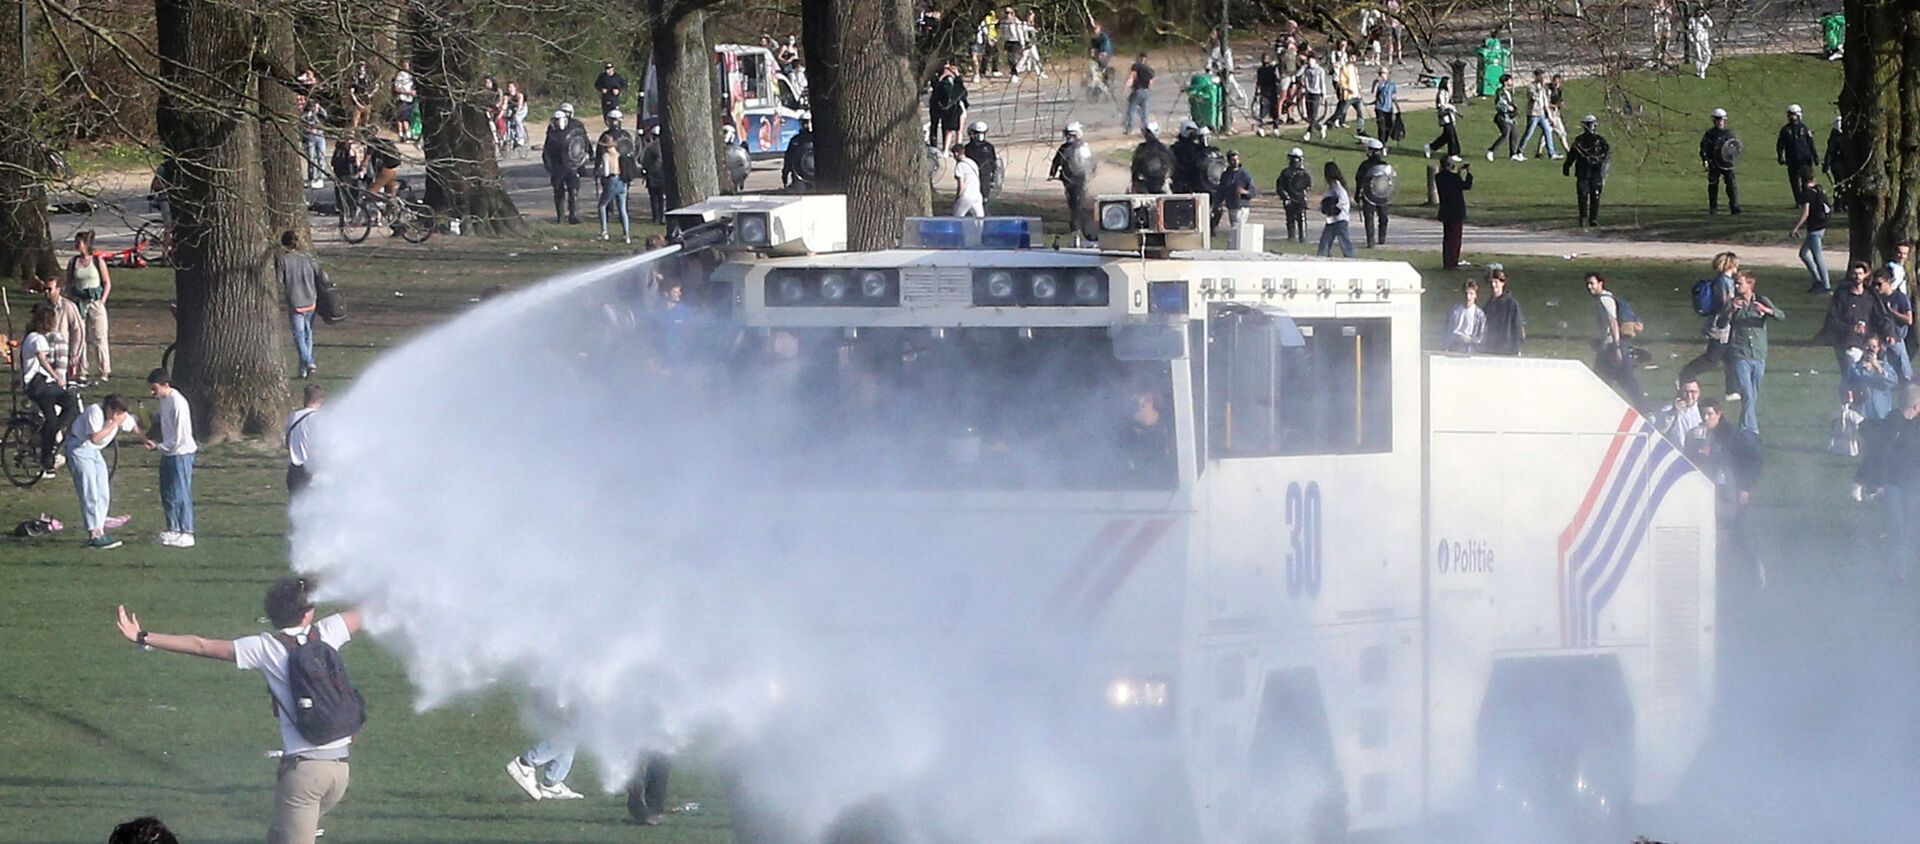 Bystanders and demonstrators are soaked by a Belgian police water canon as police officers surround them at the Bois de la Cambre parc, in Brussels, on April 1, 2021 during a unauthorised rally, for a fake concert announced on social media as an April Fool's Day prank. (Photo by Franзois WALSCHAERTS / AFP) - Sputnik International, 1920